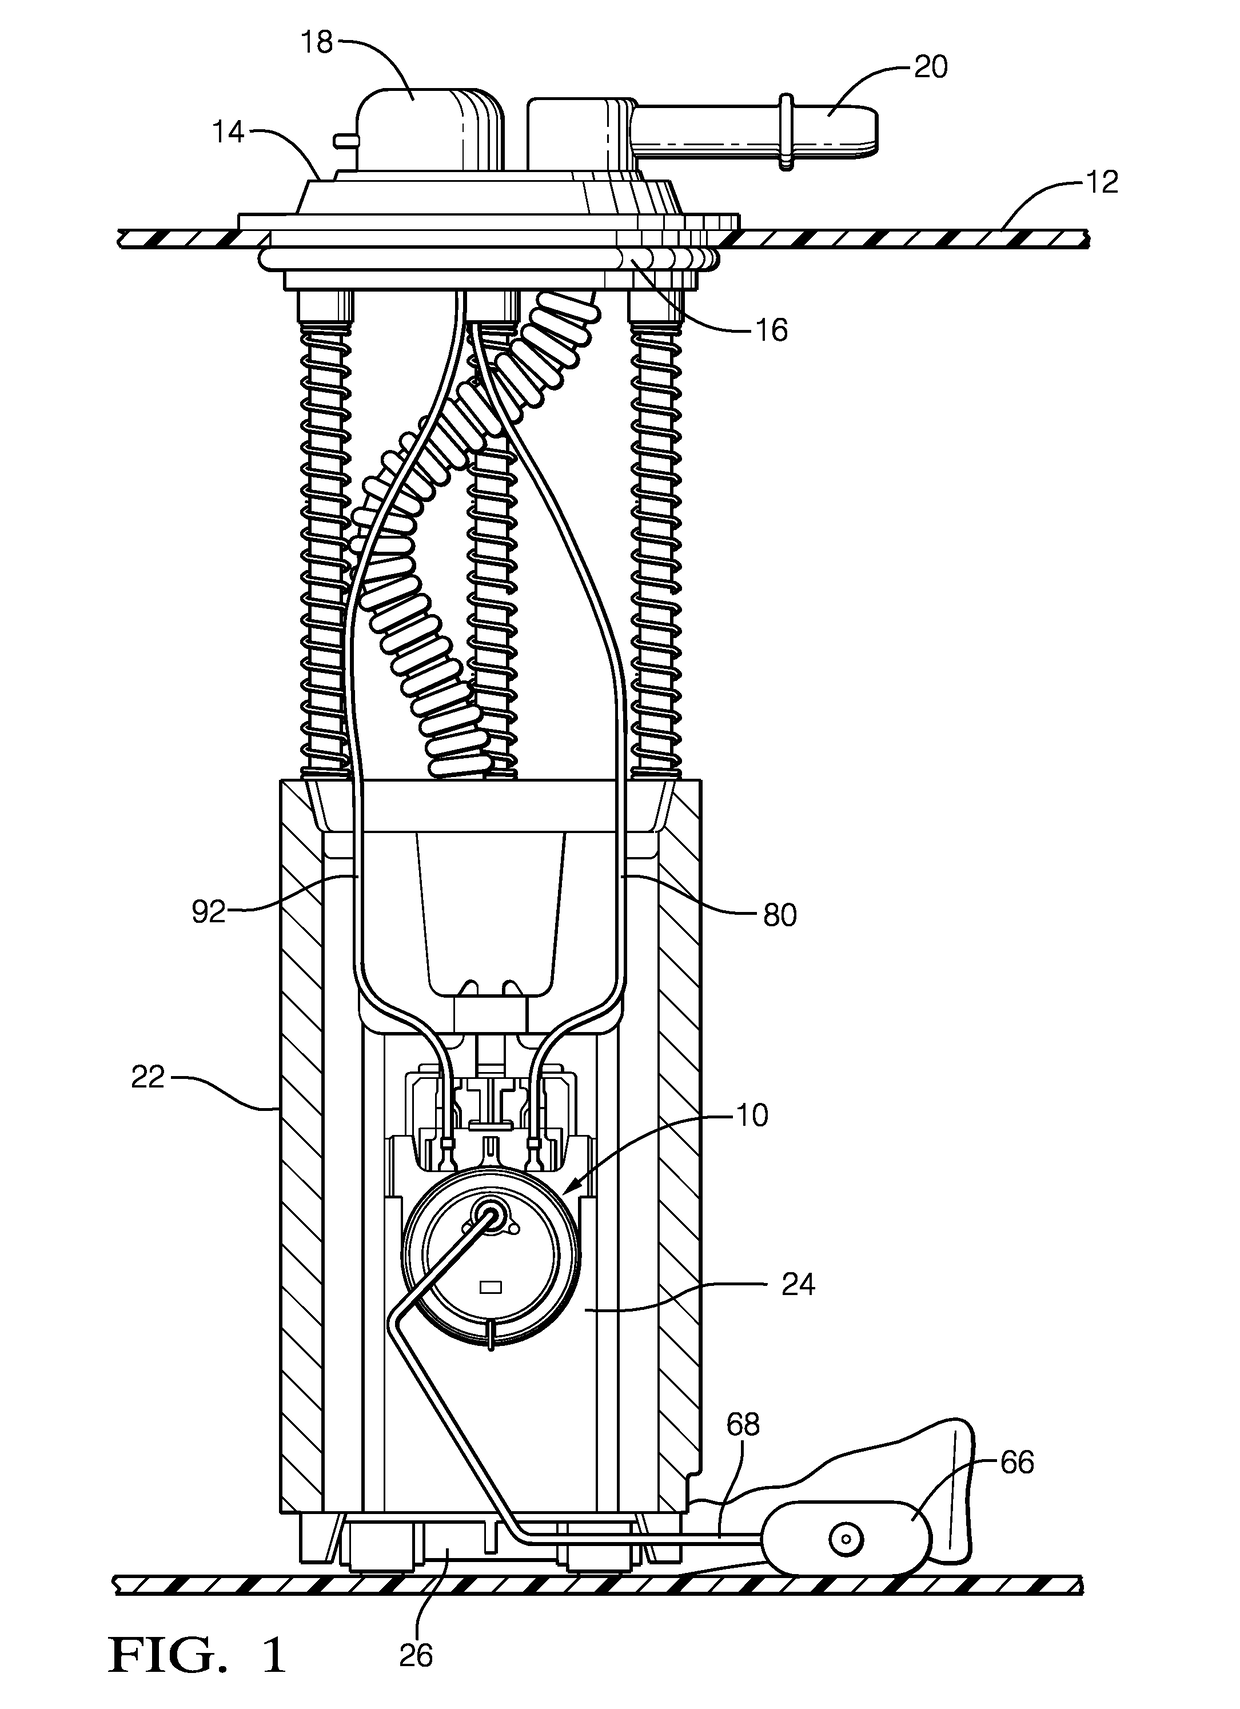 Electrical connection having a gold contact surface with discrete areas of hardness and fuel level sensor using the same